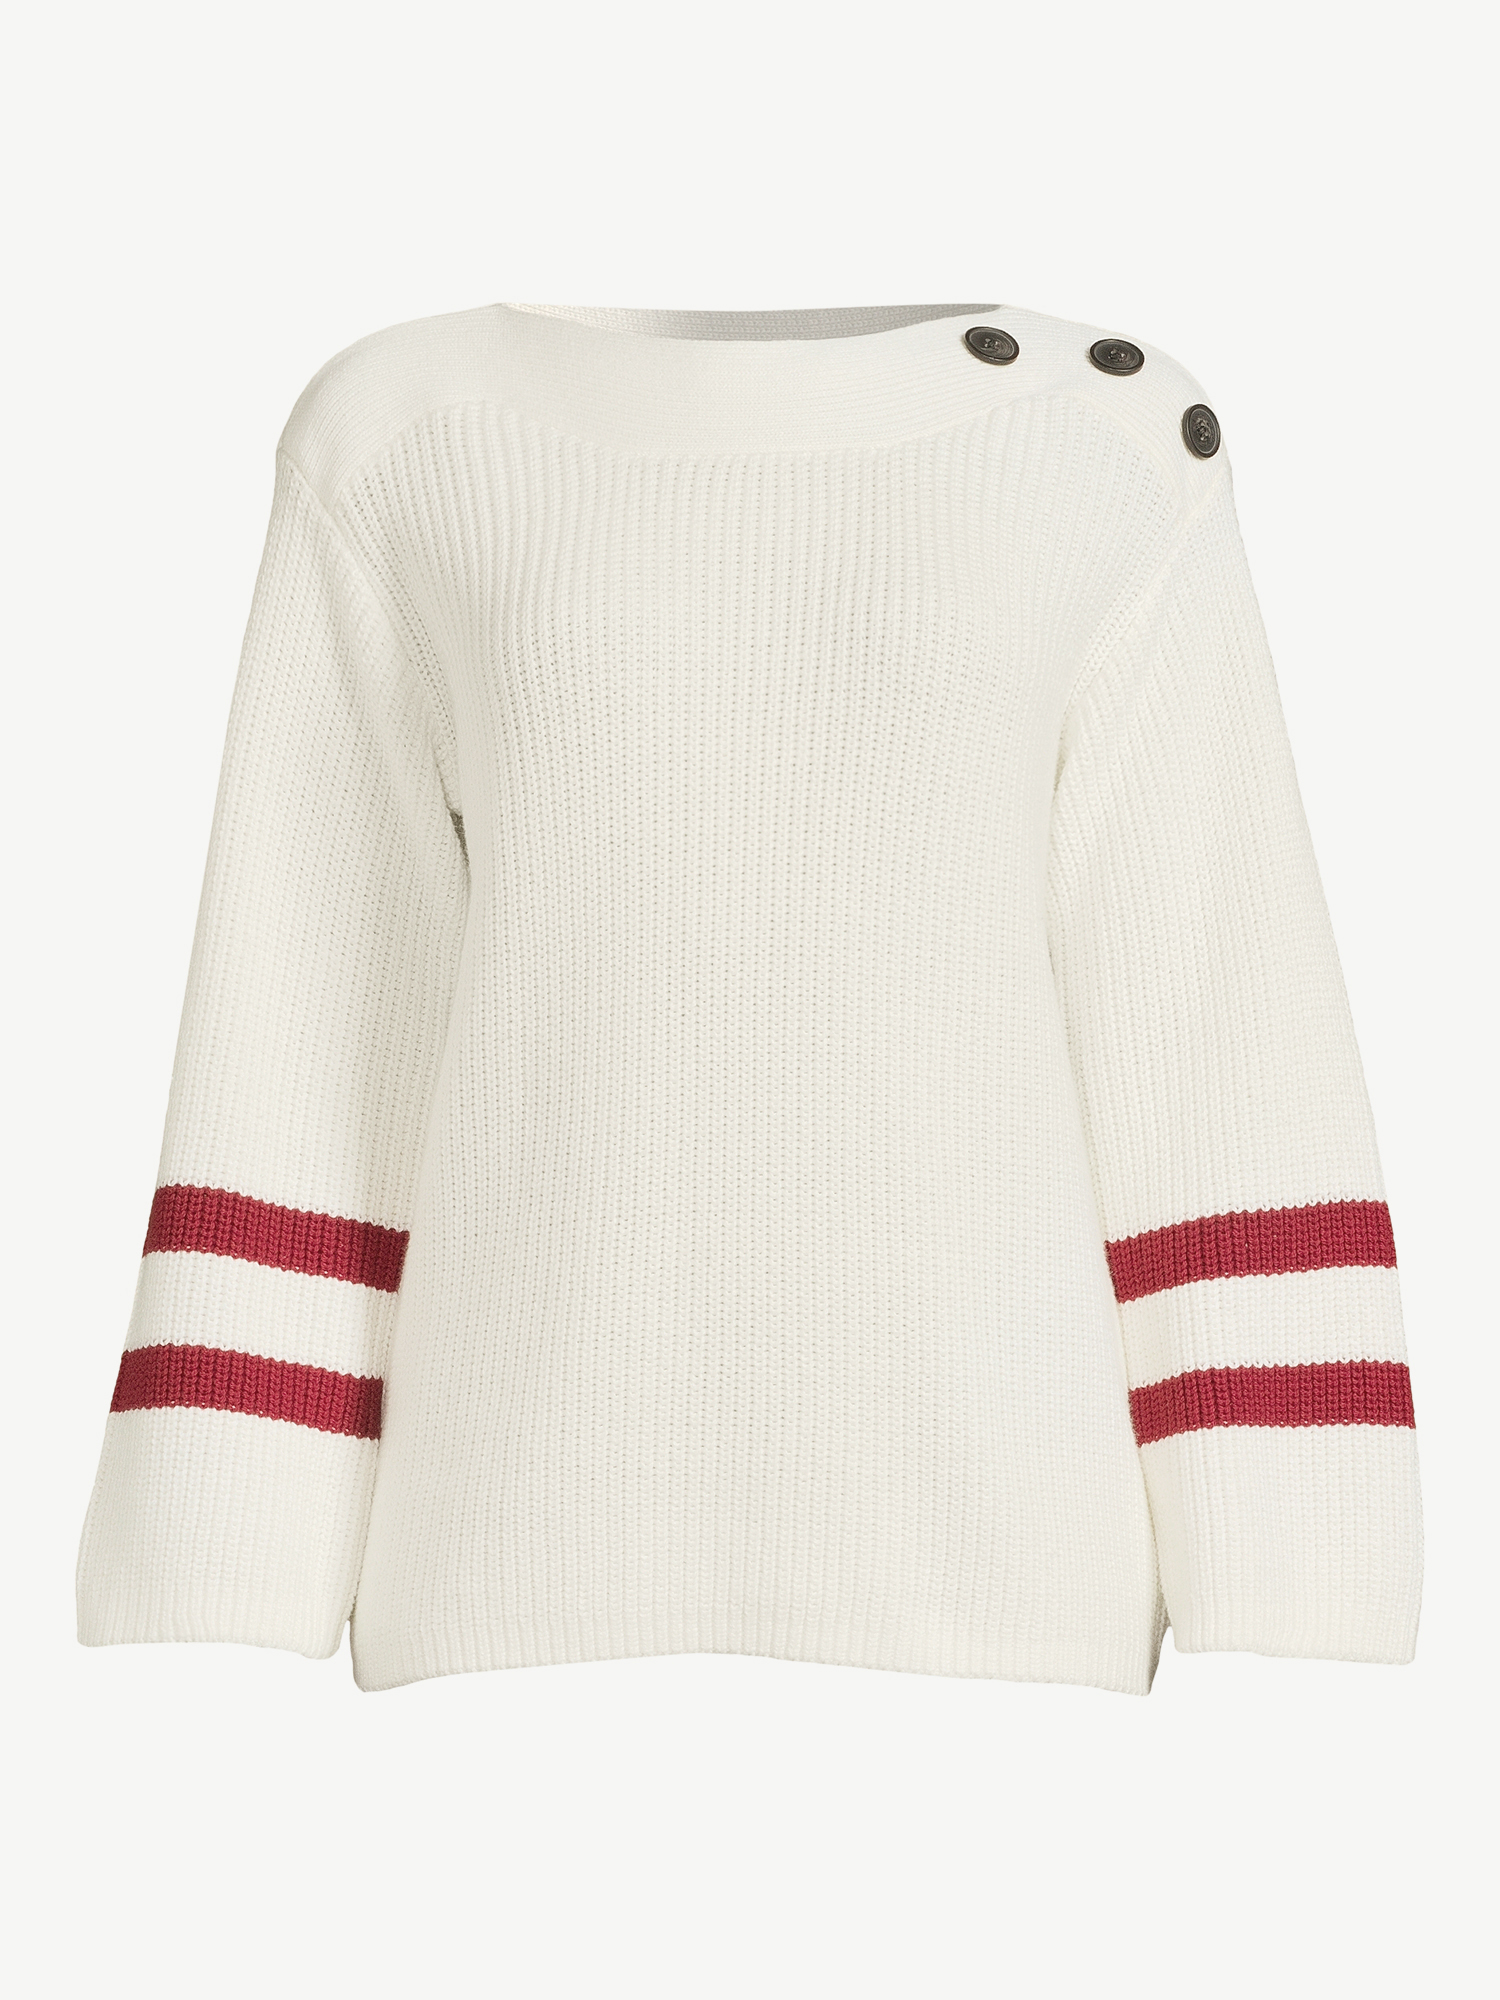 Free Assembly Women’s Button Shoulder Sweater - image 5 of 6